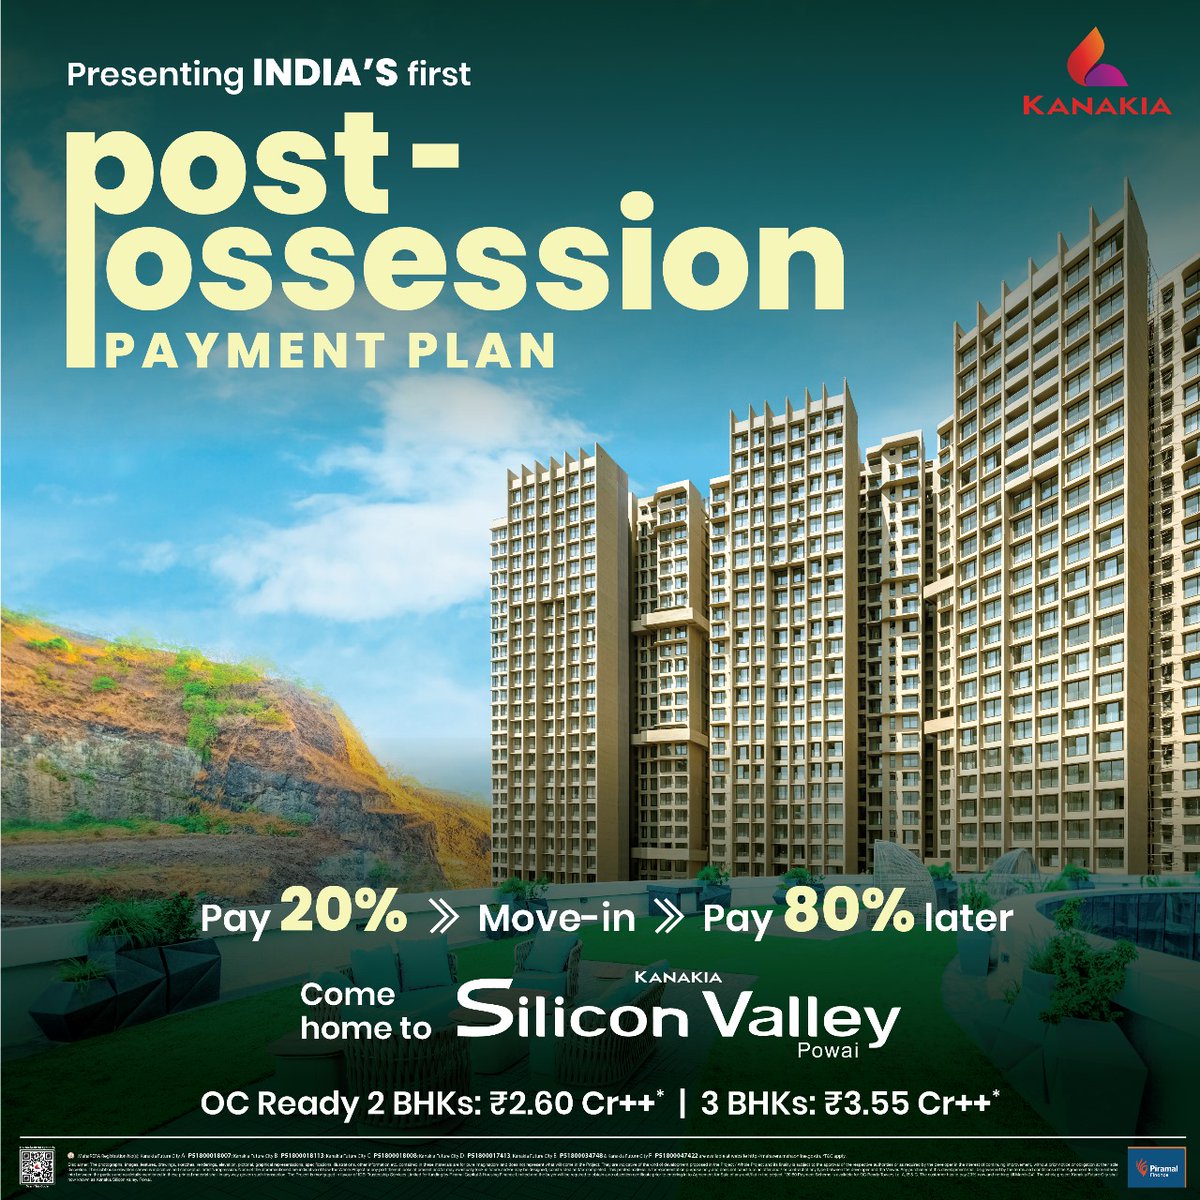 Great news for homebuyers in #Mumbai!

Kanakia Silicon Valley is offering India's first post-possession payment plan! 

Click to find out how! - kanakia.com

#Kanakia #KanakiaRealEestate #RealEstate #Realty #Siliconvalley #SiliconValleyPowai #PowaiHomes #Powai